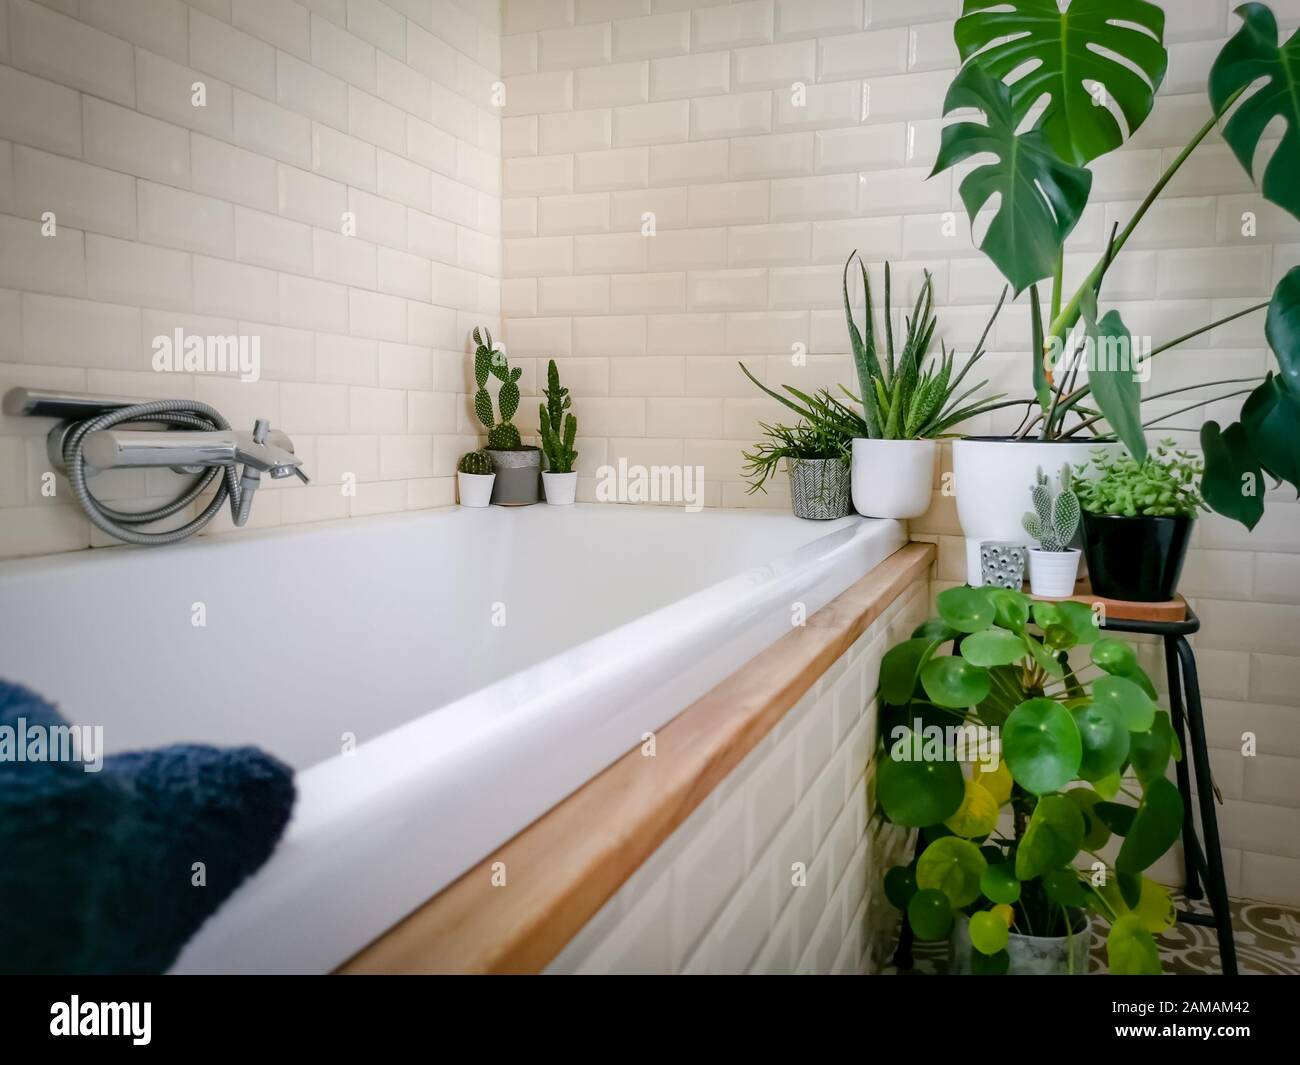 Bright bathroom with subway tiles and a large variety of green potted plants such as a pancake plant and swiss cheese plant creating a green oasis Stock Photo